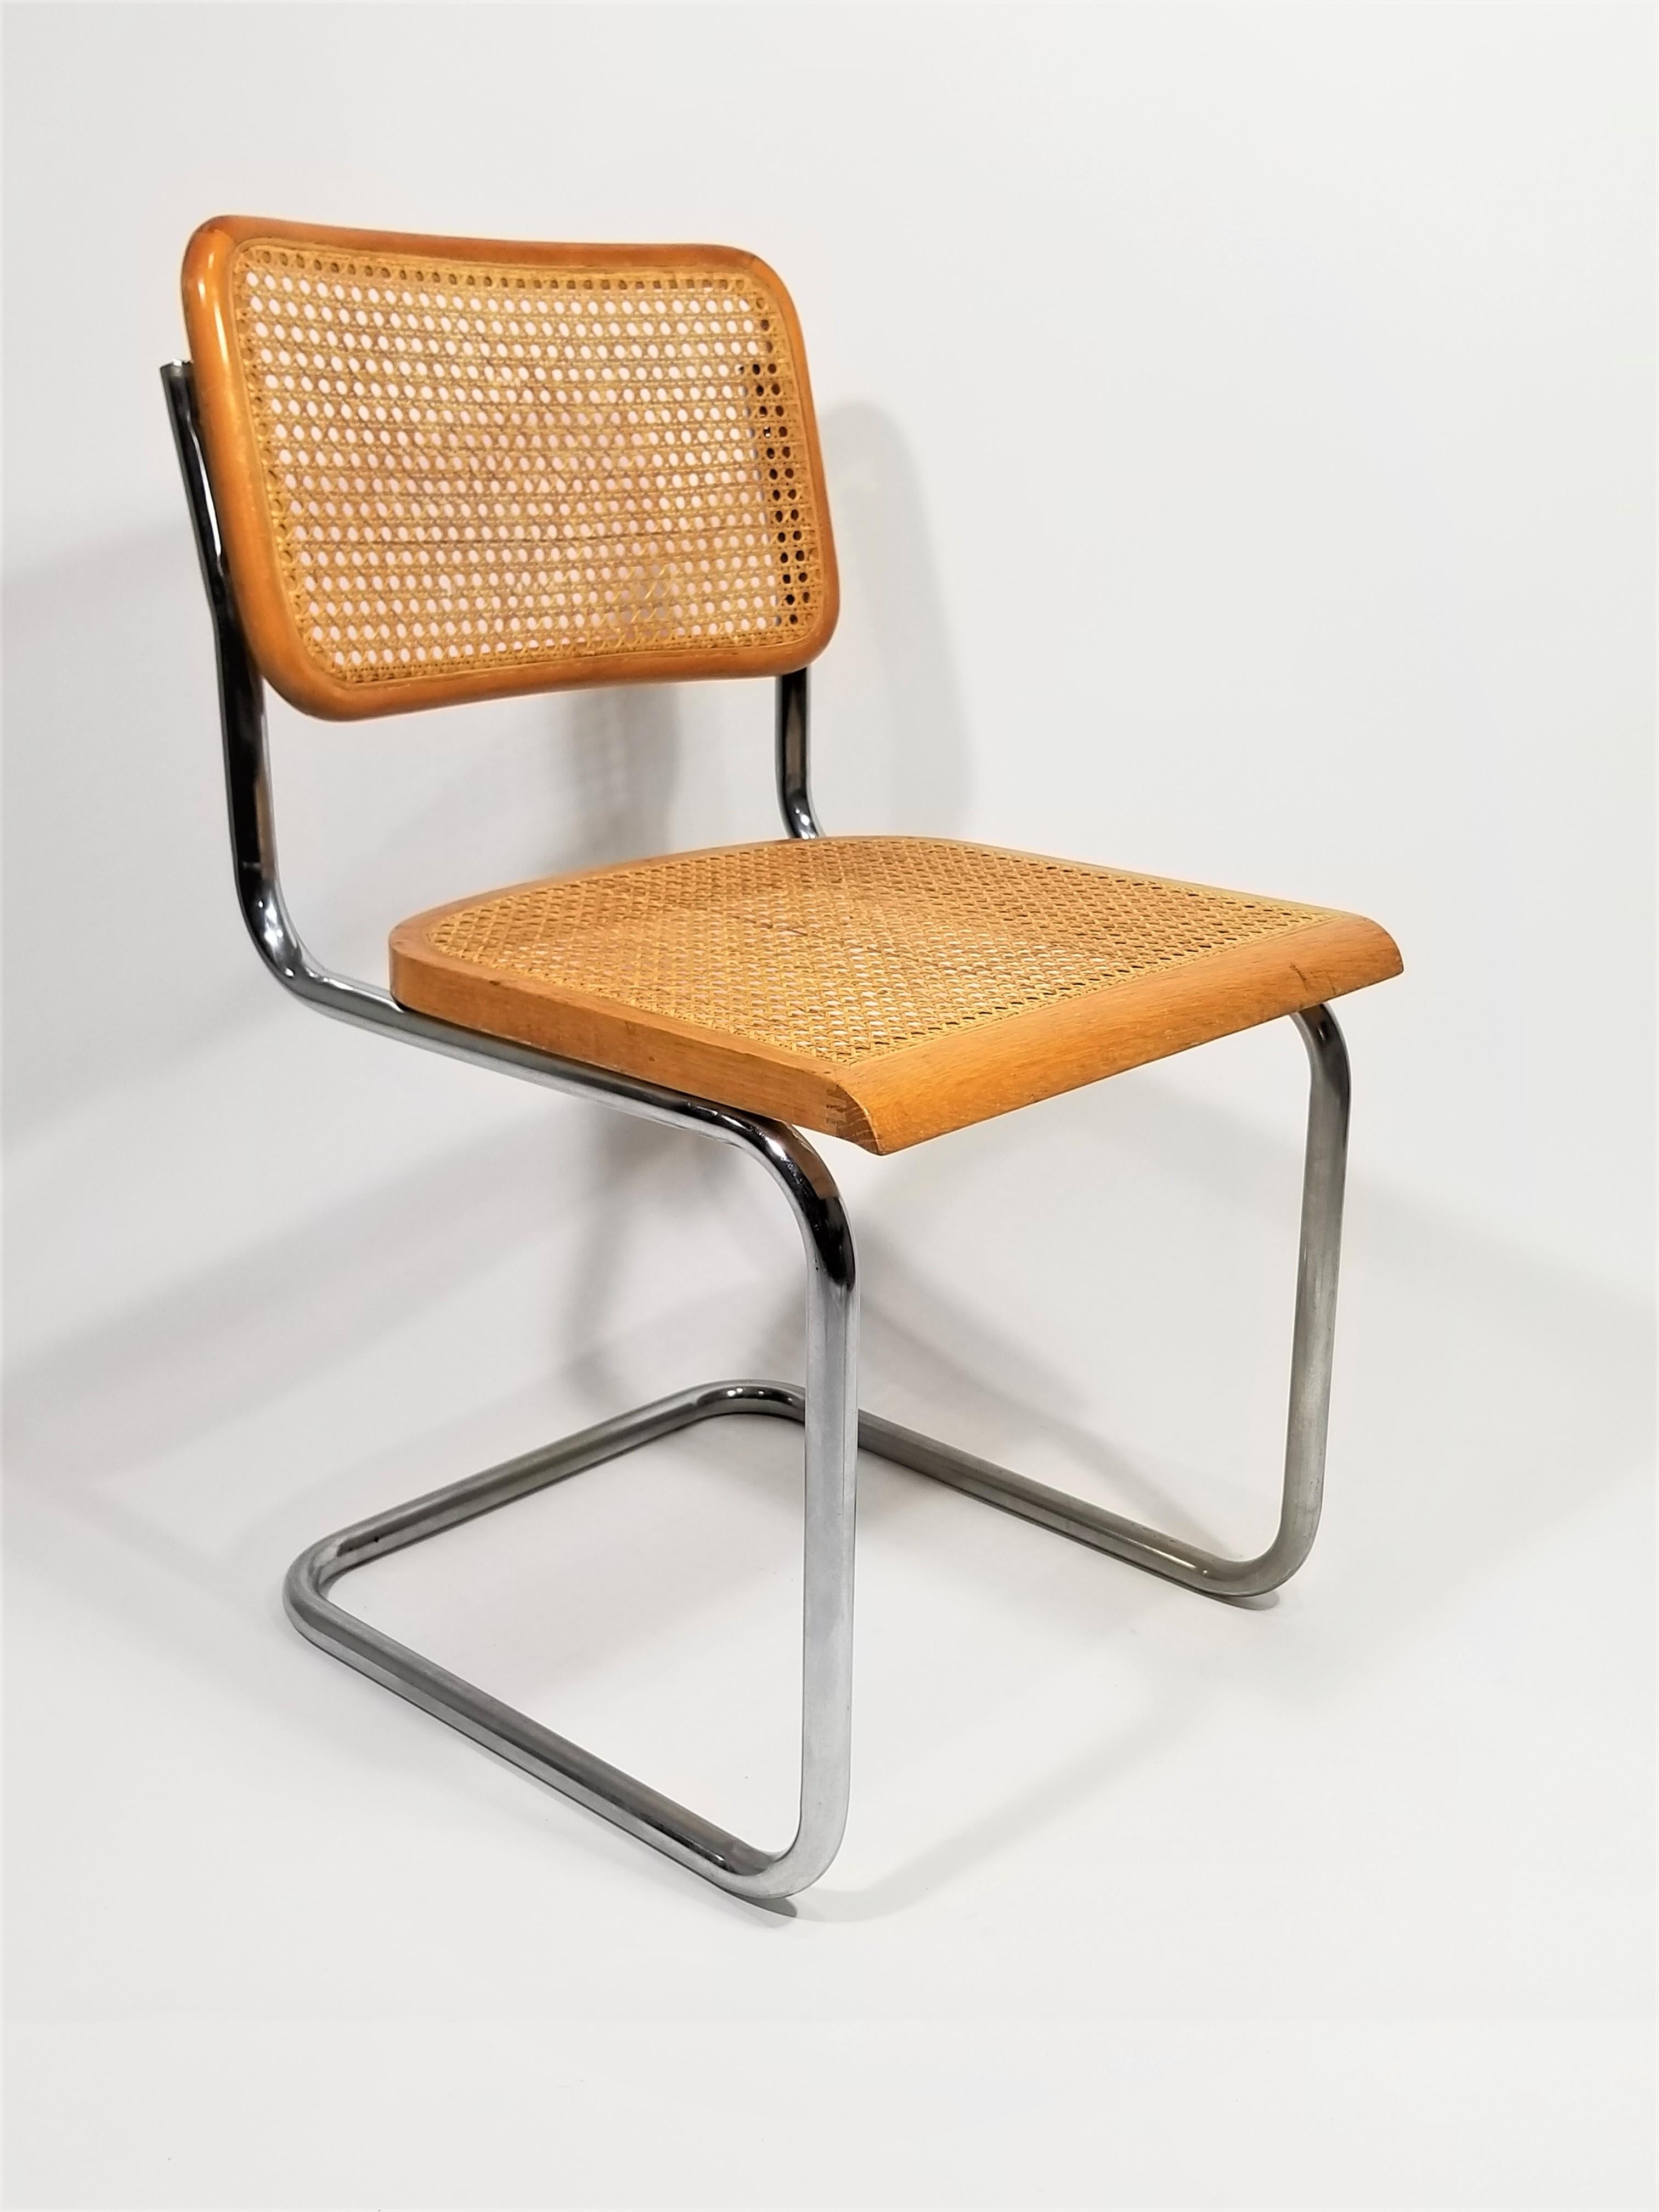 Mid century 1970s Marcel Breuer cesca side chair. natural finish. Cane seat and back. Classic chrome Cantilever frame.